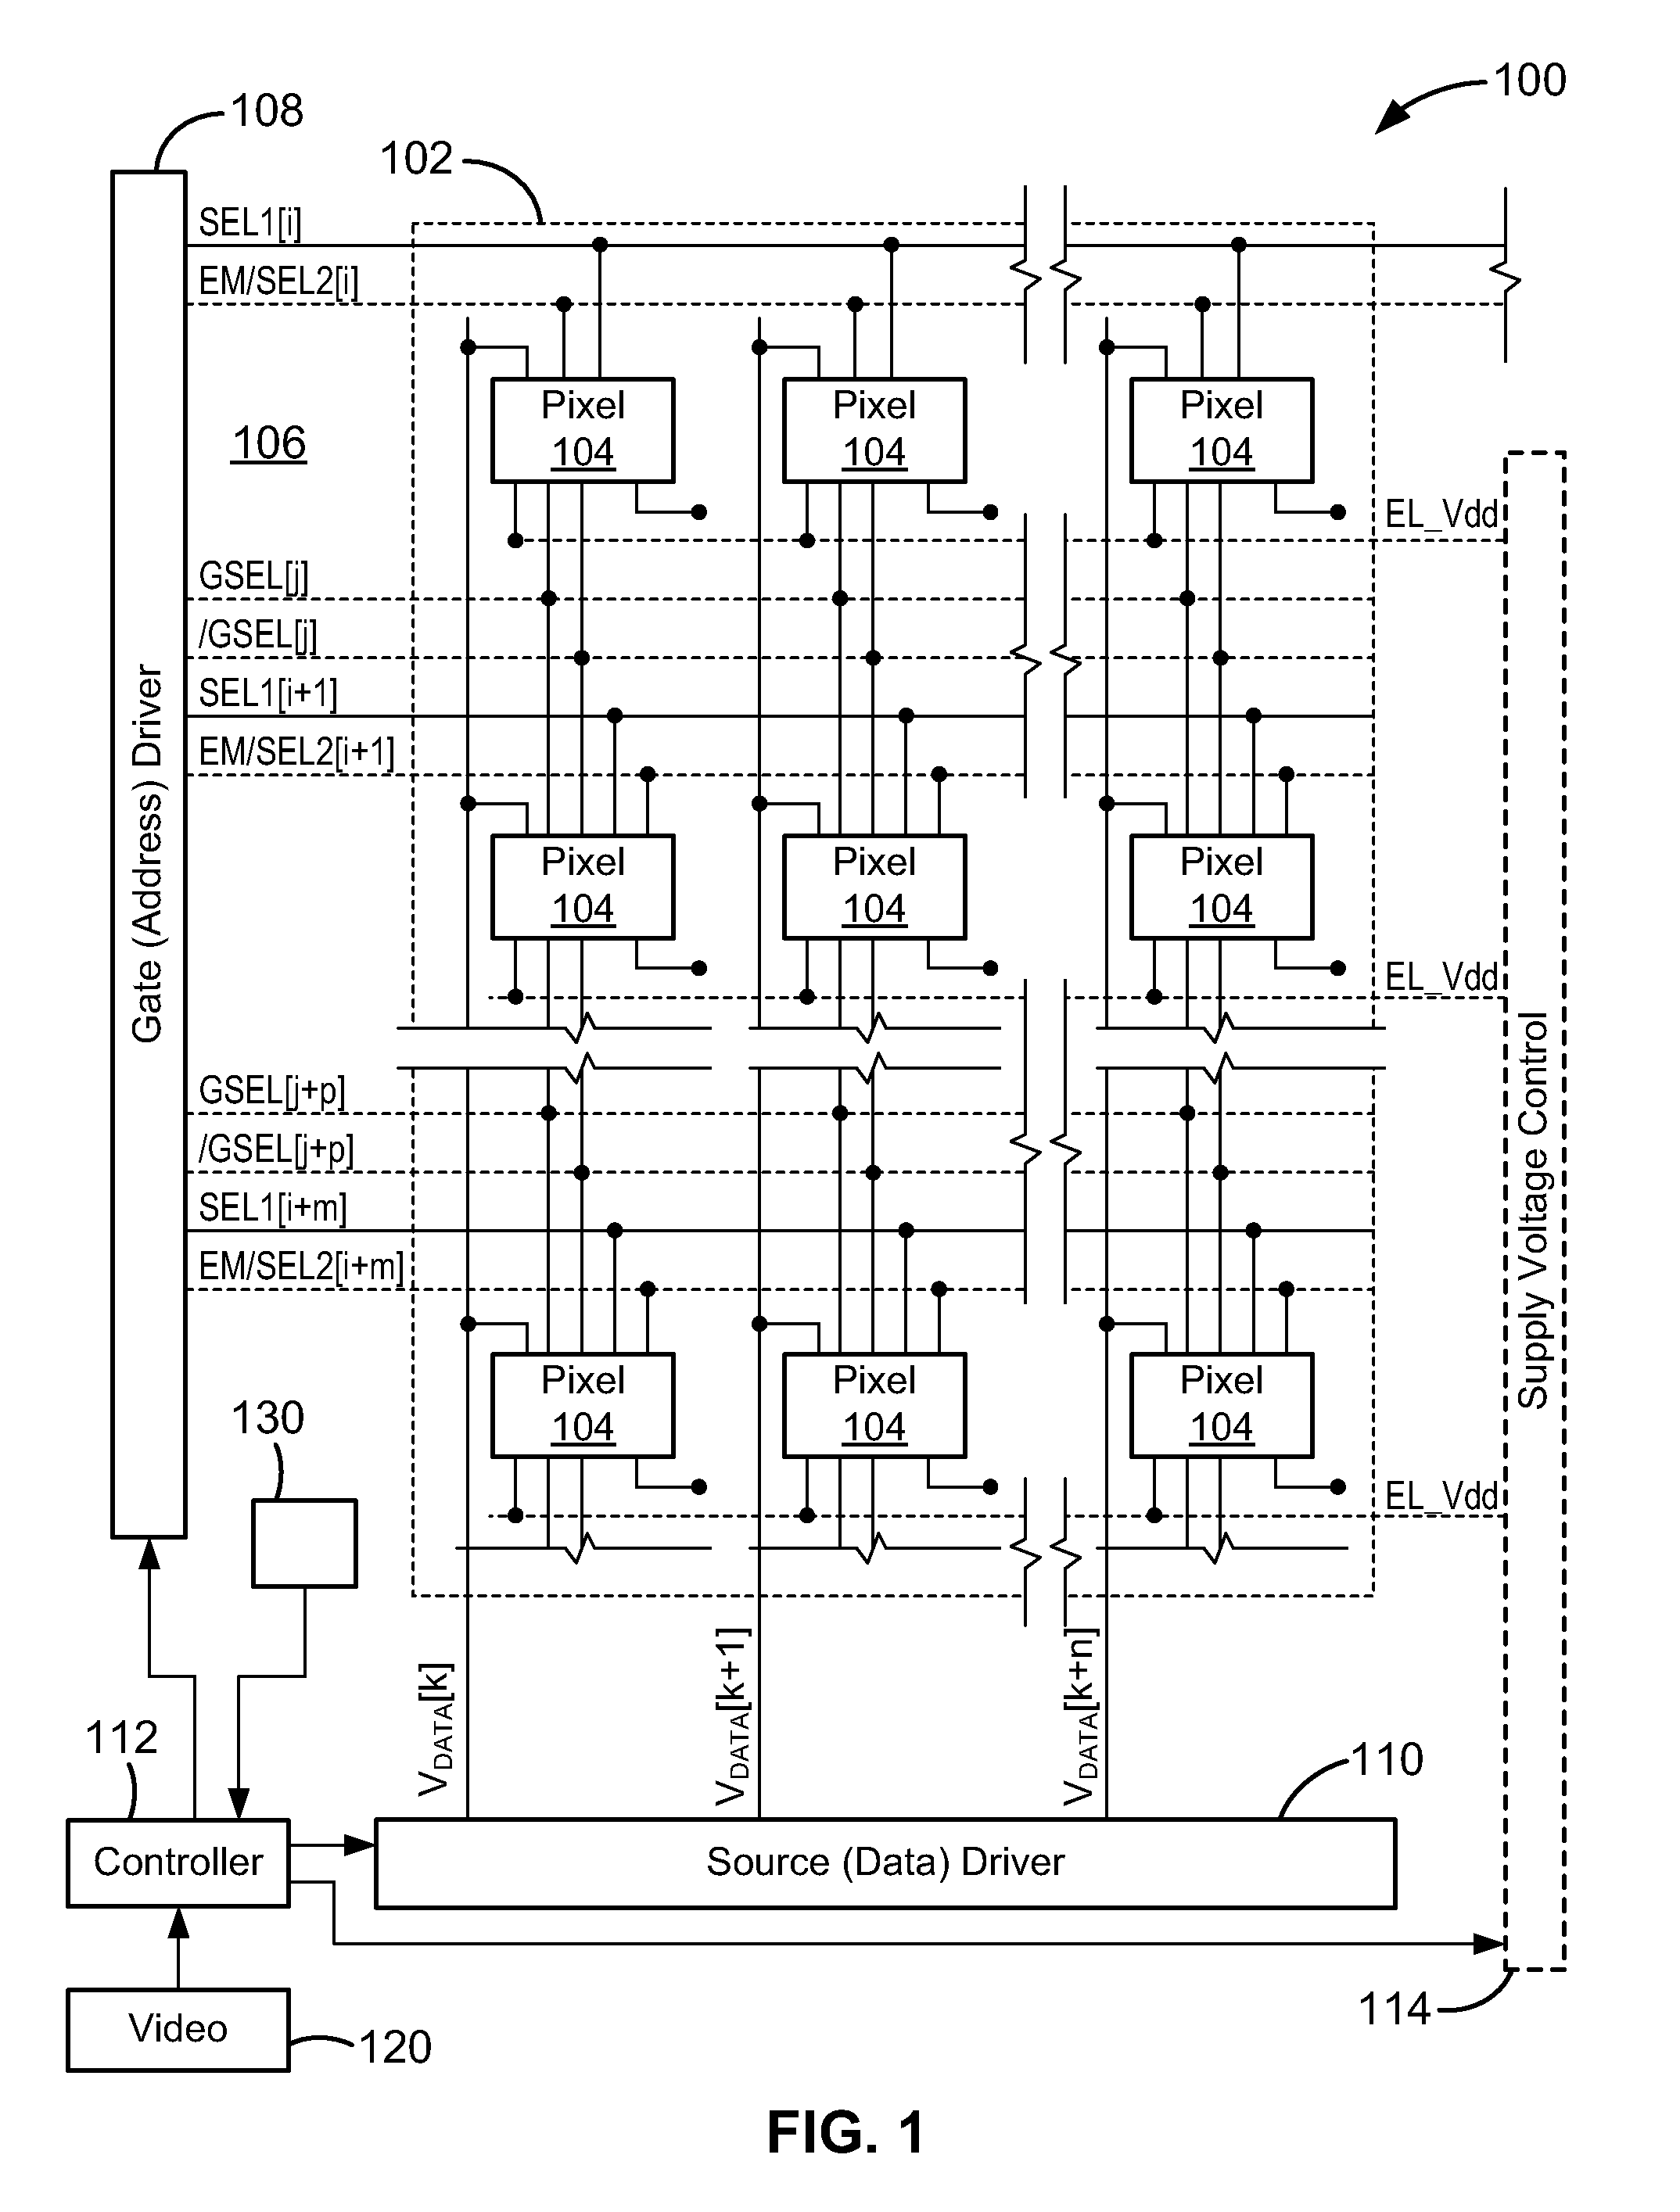 Driving System For Active-Matrix Displays